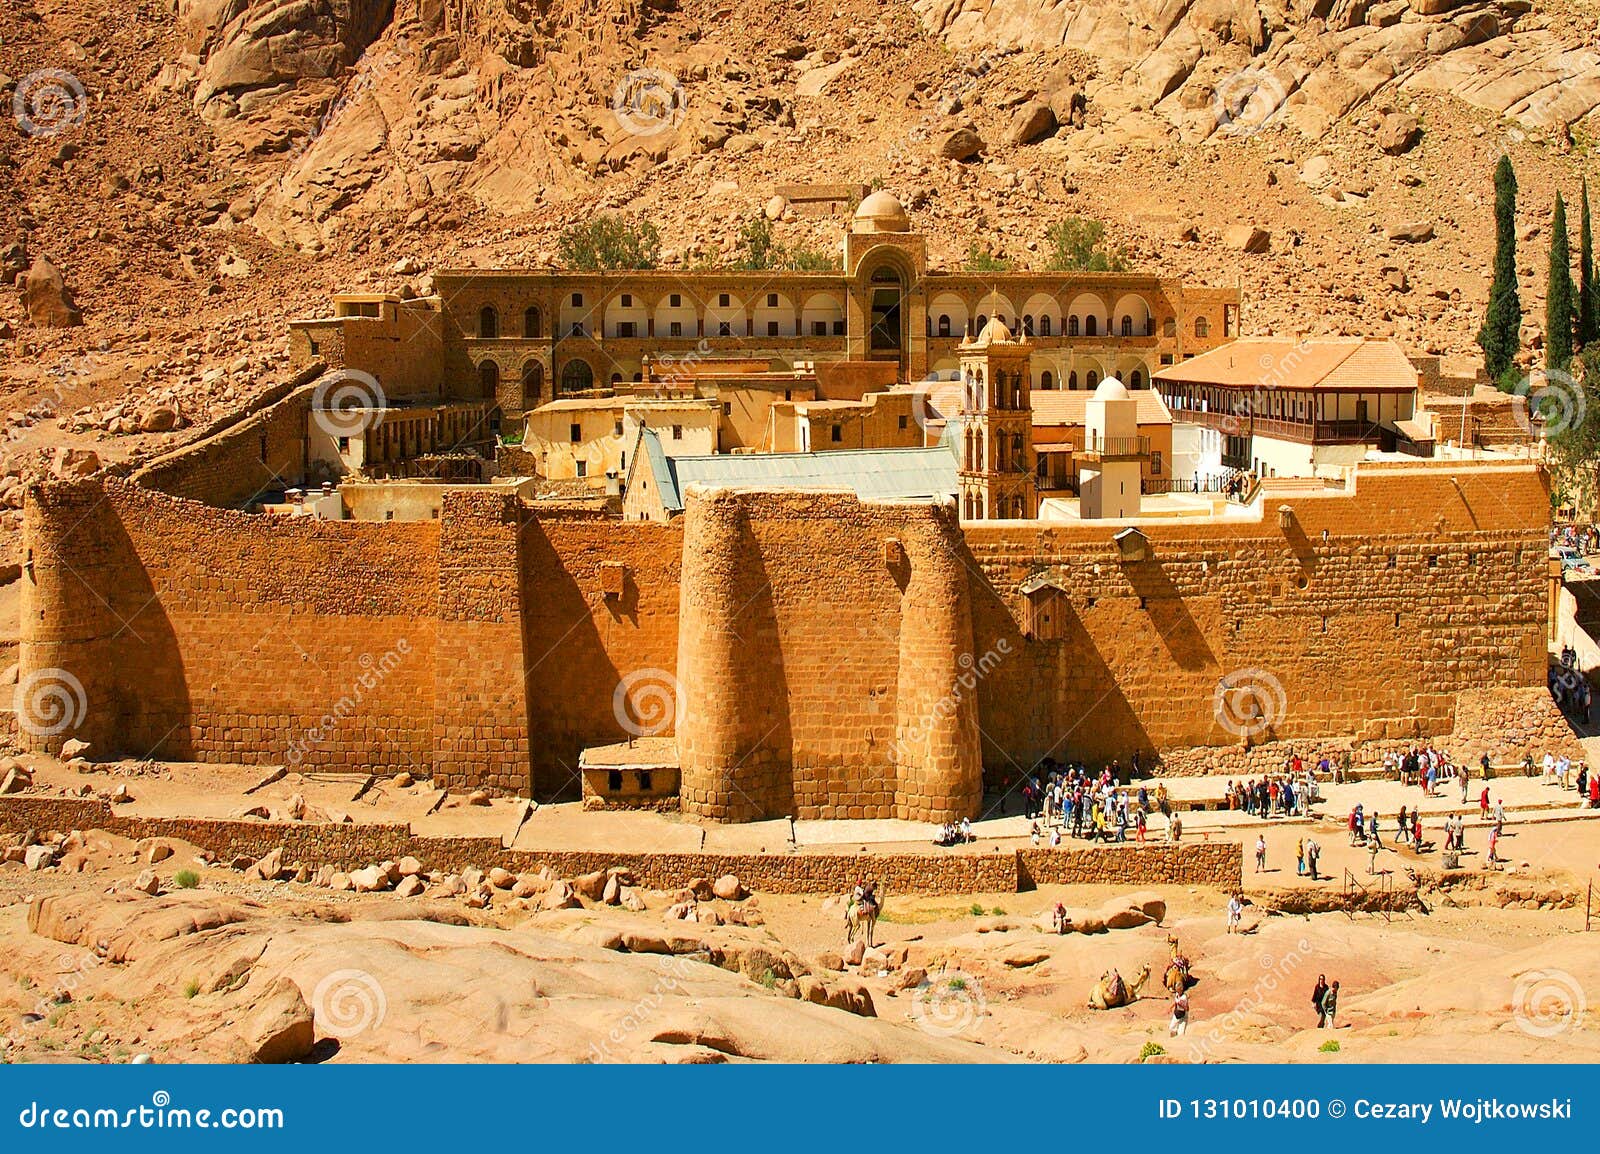 saint catherine`s monastery sacred monastery of the god trodden mount sinai, mouth of a gorge at the foot of mount sinai,